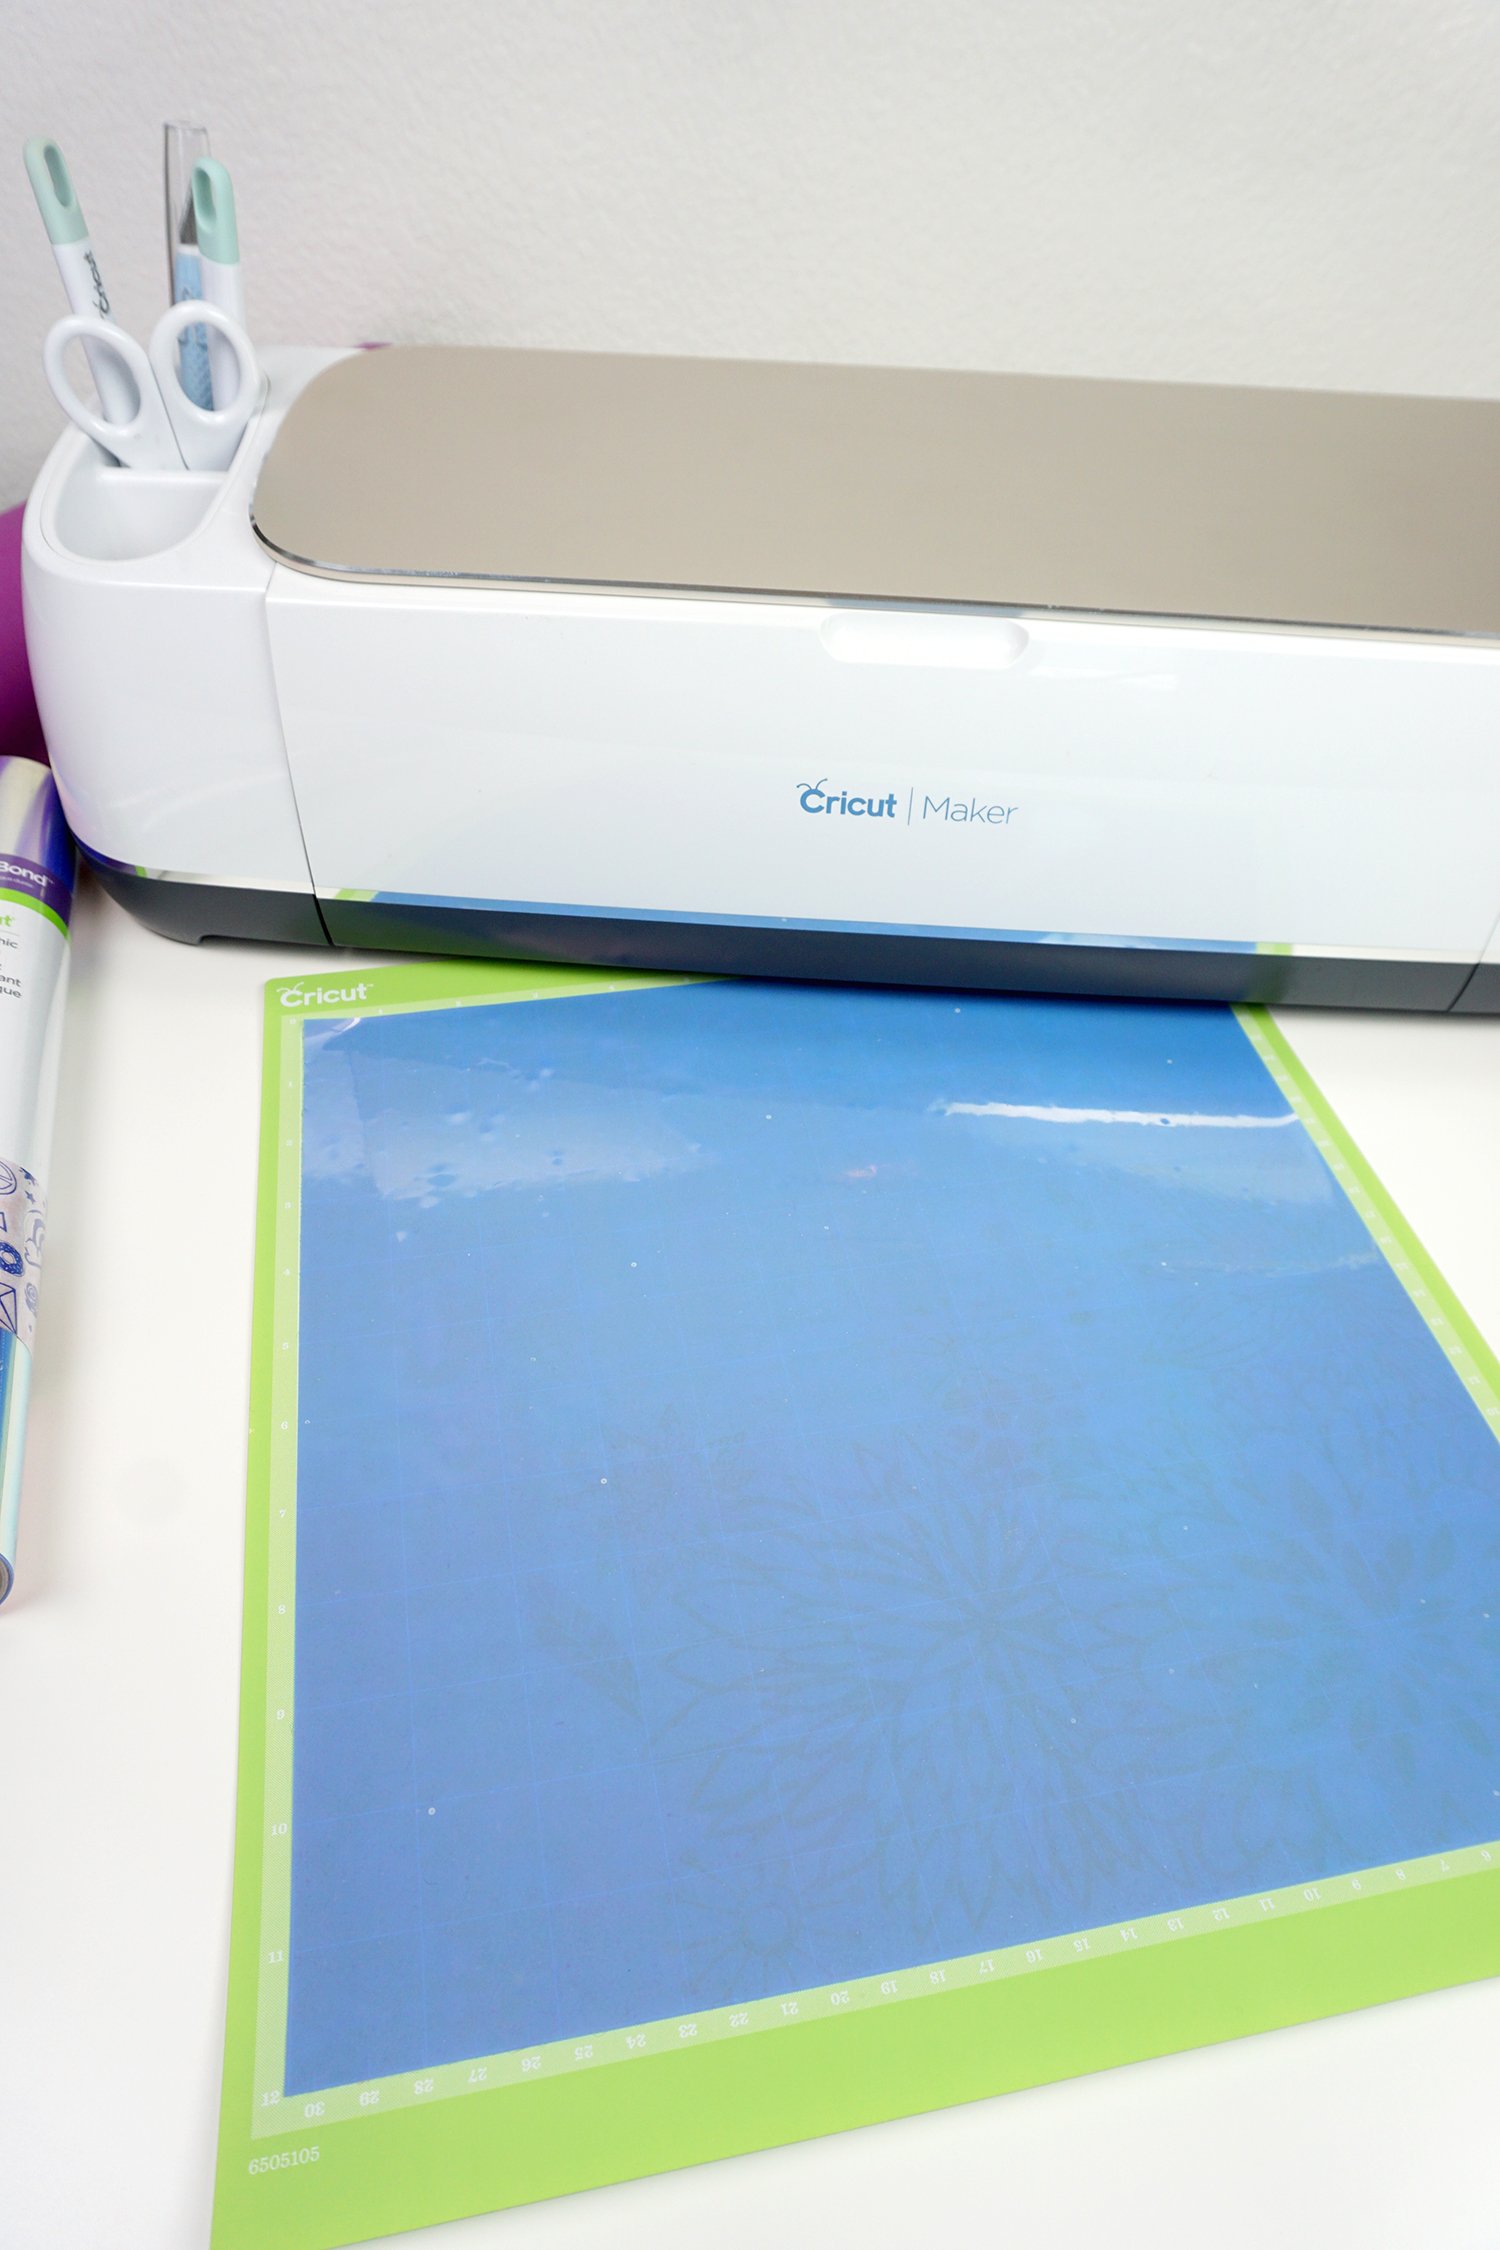 cricut maker with holographic iron on material